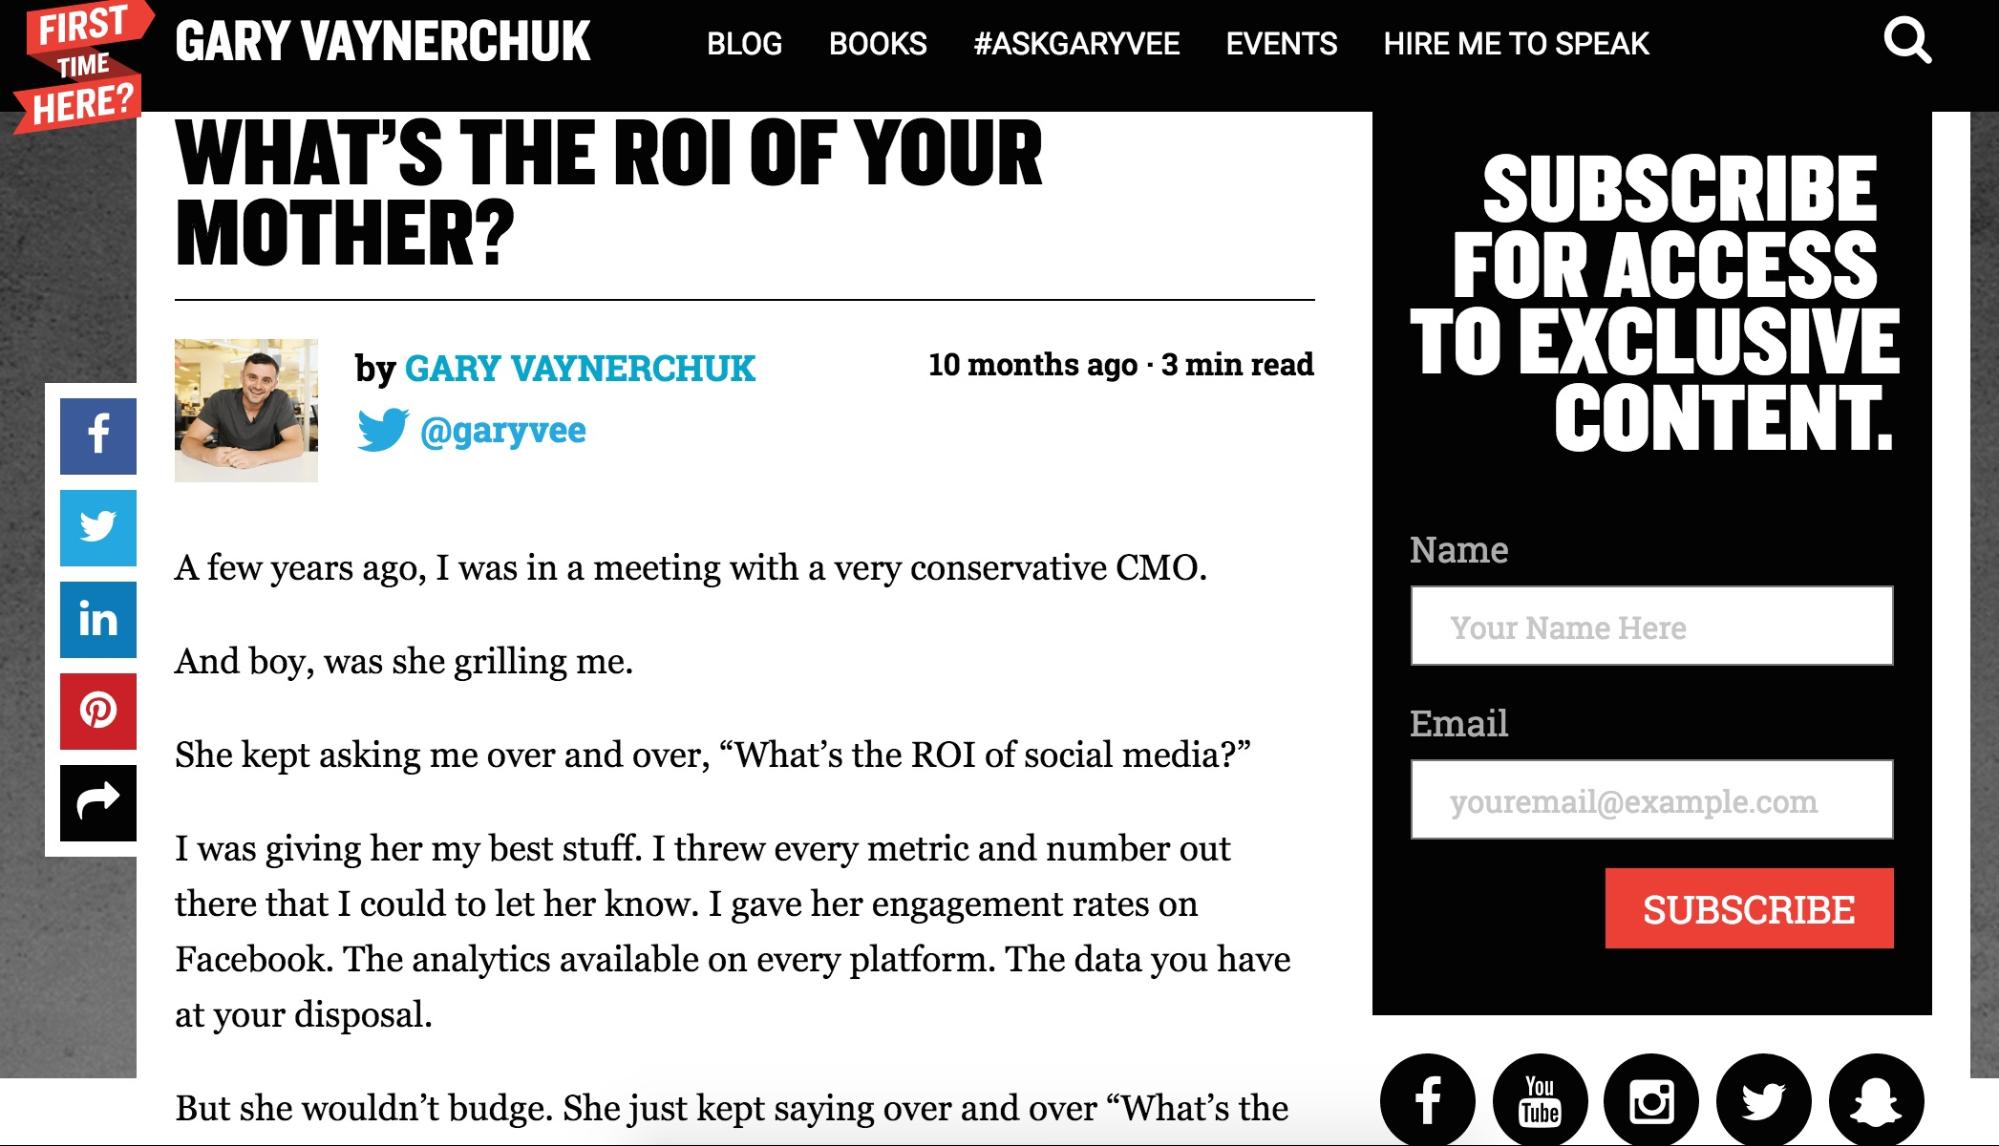 Gary Vaynerchuk article with eye catching title example